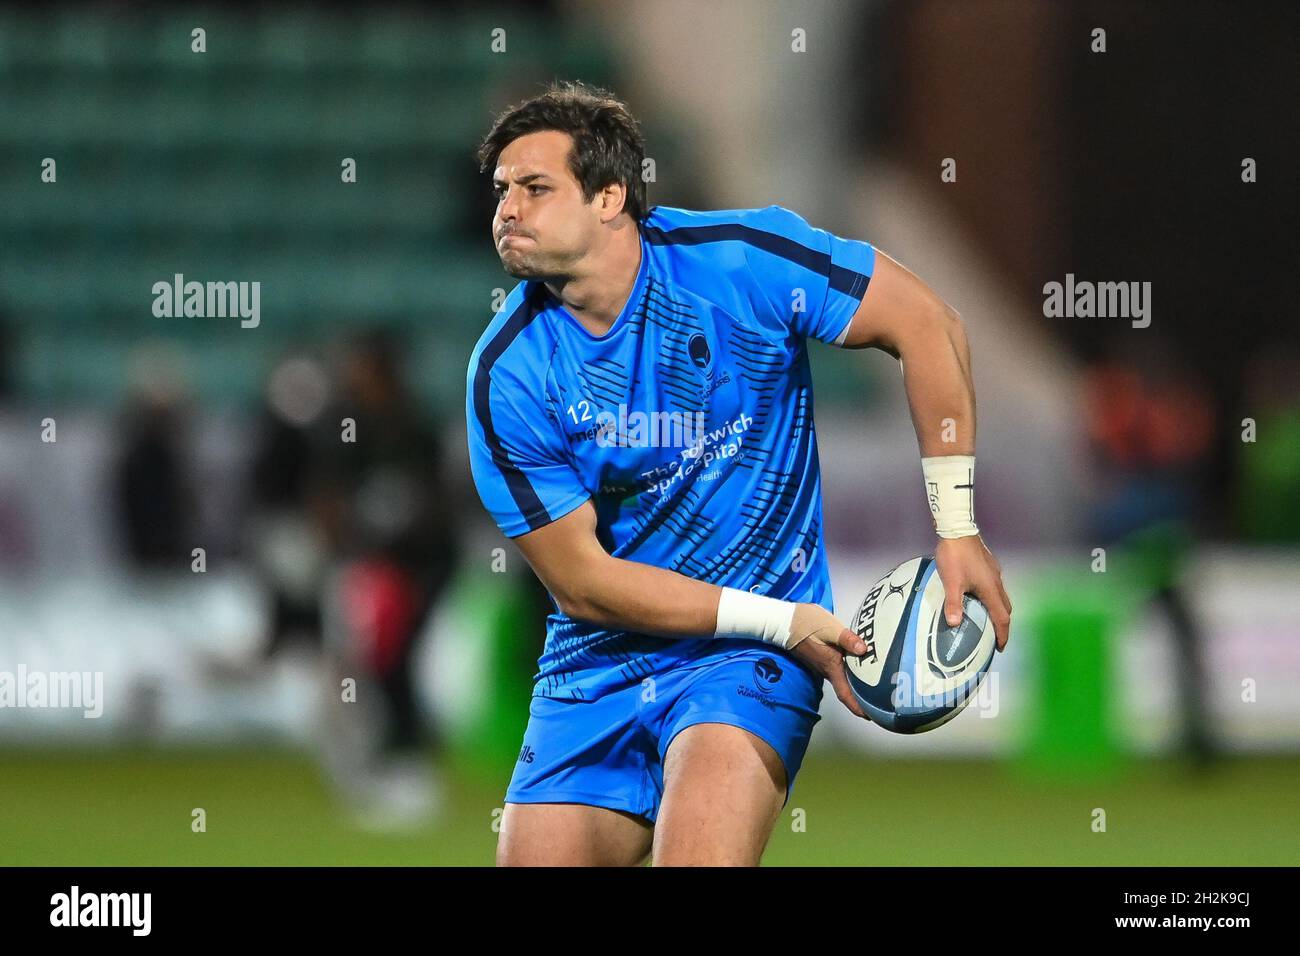 Northampton, UK. 22nd Oct, 2021. Francois Venter of Worcester Warriors during pre match warm up in, on 10/22/2021. (Photo by Craig Thomas/News Images/Sipa USA) Credit: Sipa USA/Alamy Live News Credit: Sipa USA/Alamy Live News Stock Photo